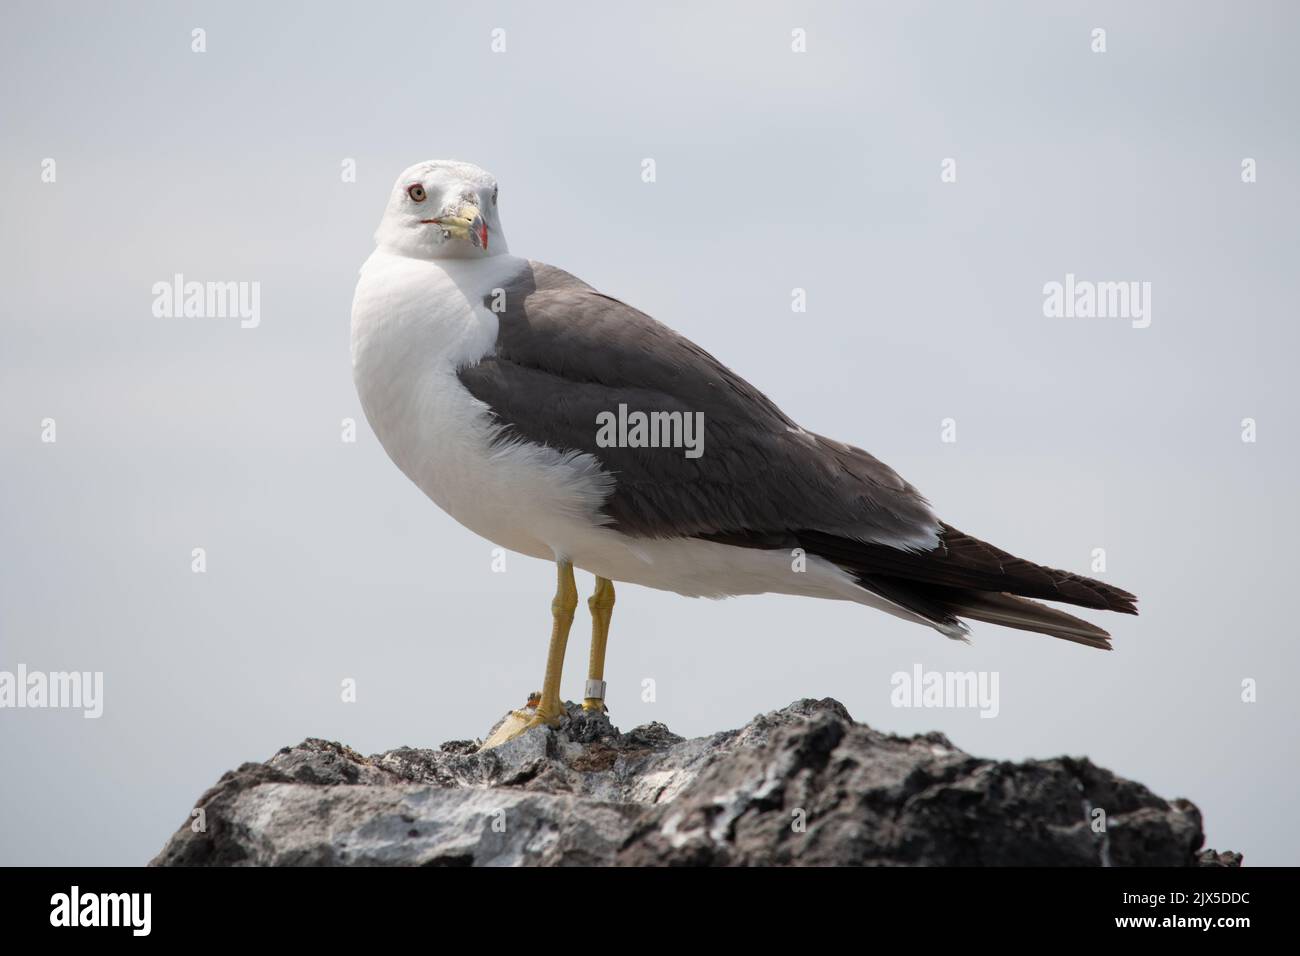 Black tailed seagull with tag on leg Stock Photo